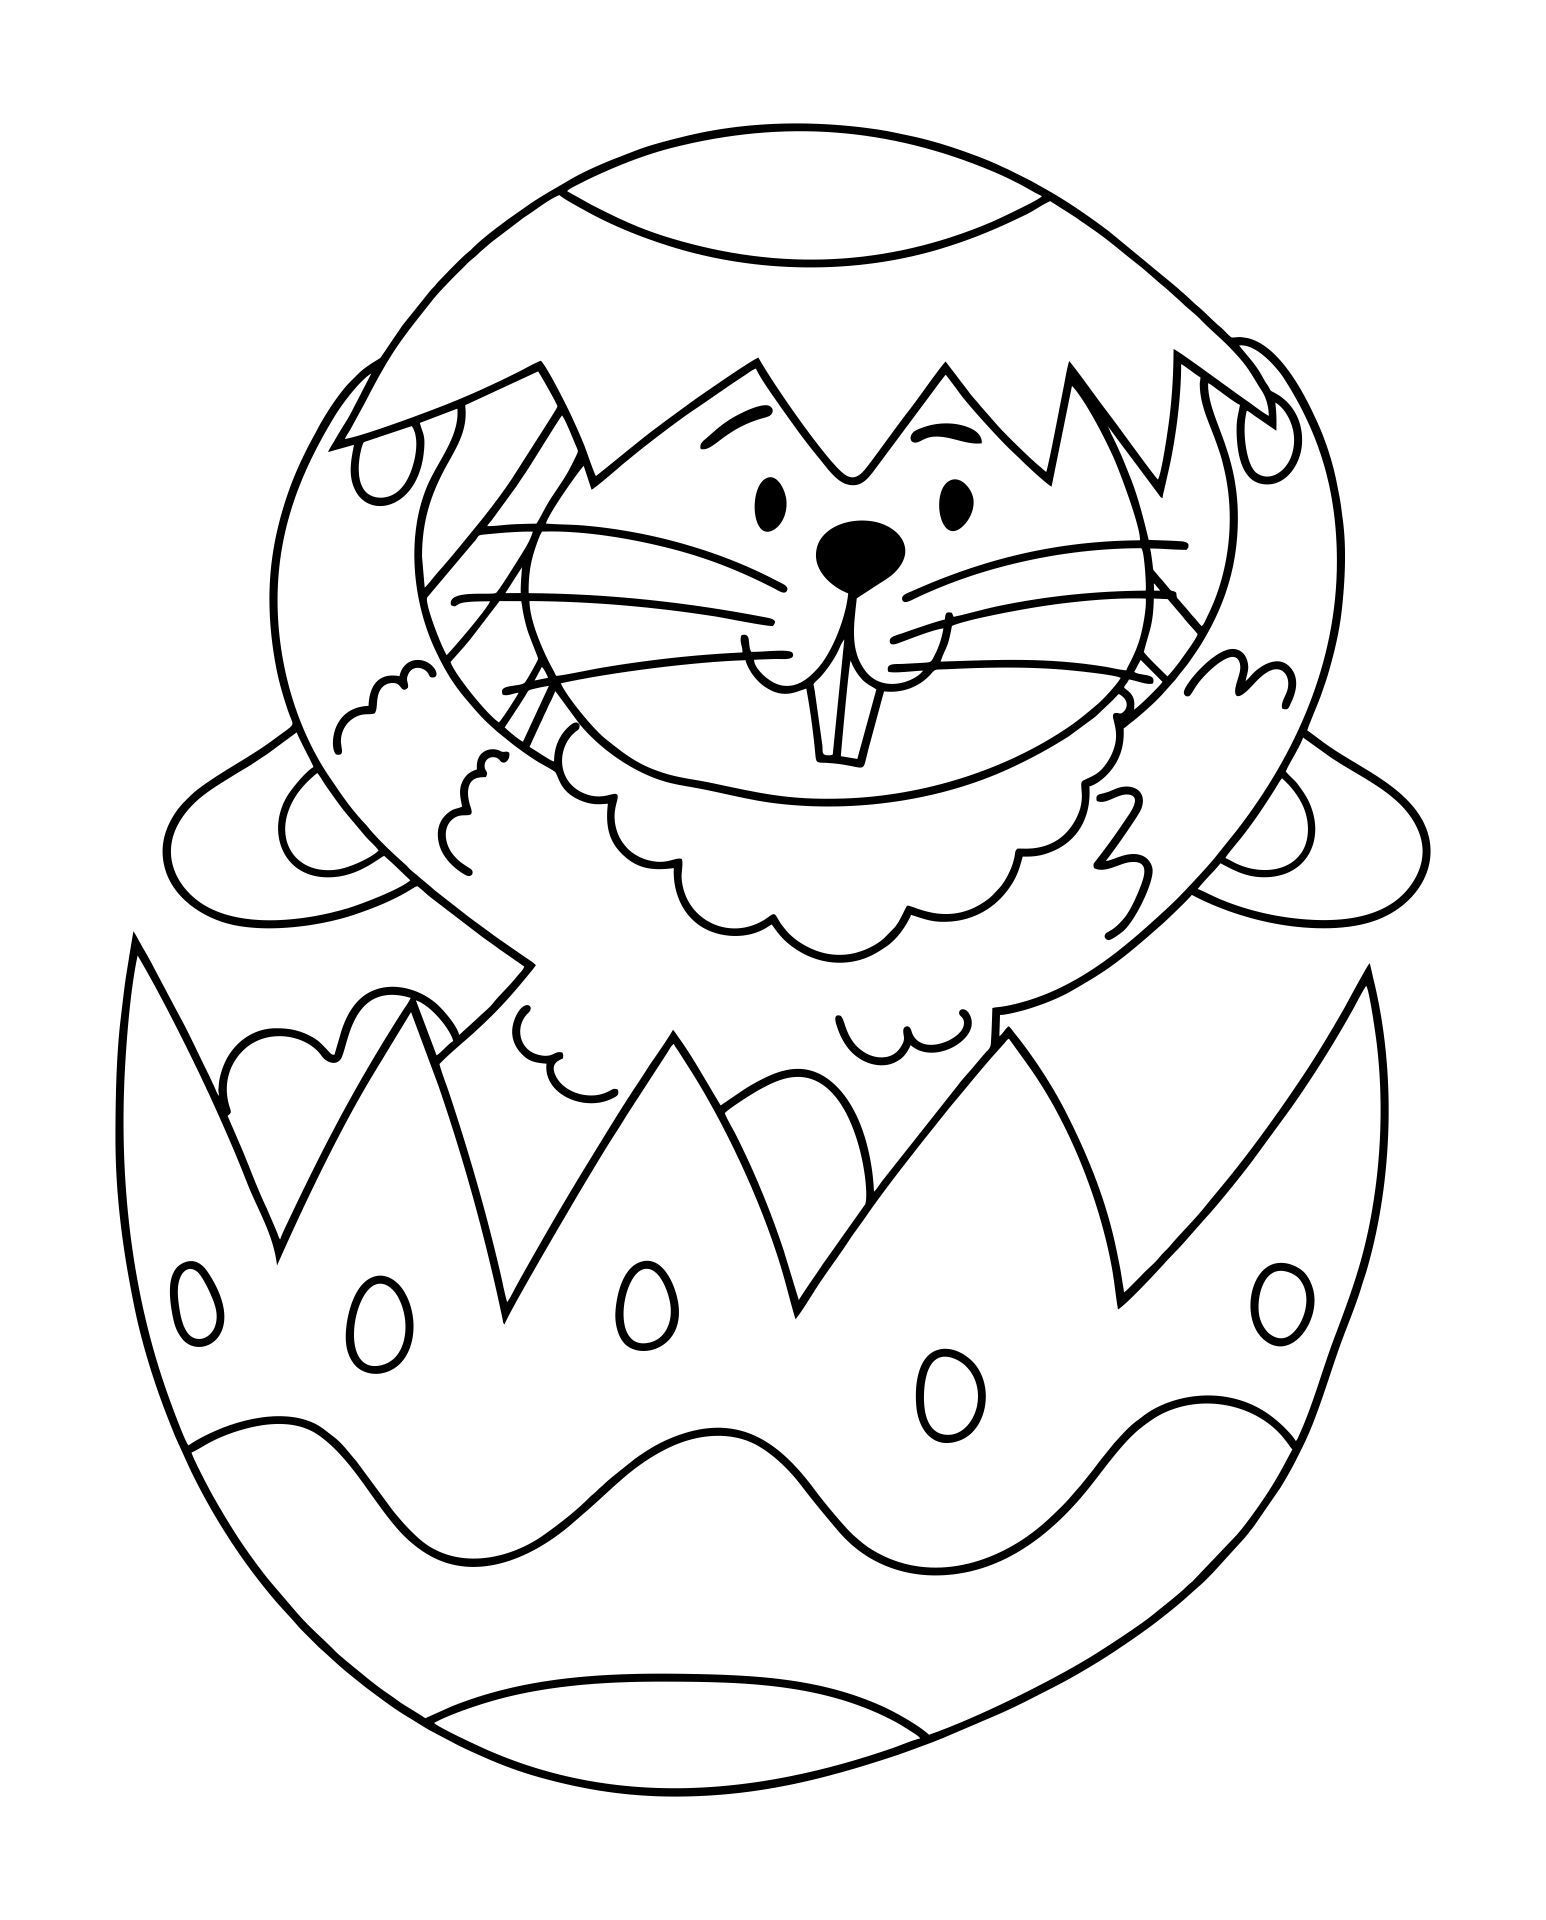 Printable Easter Eggs Surprise Coloring Page